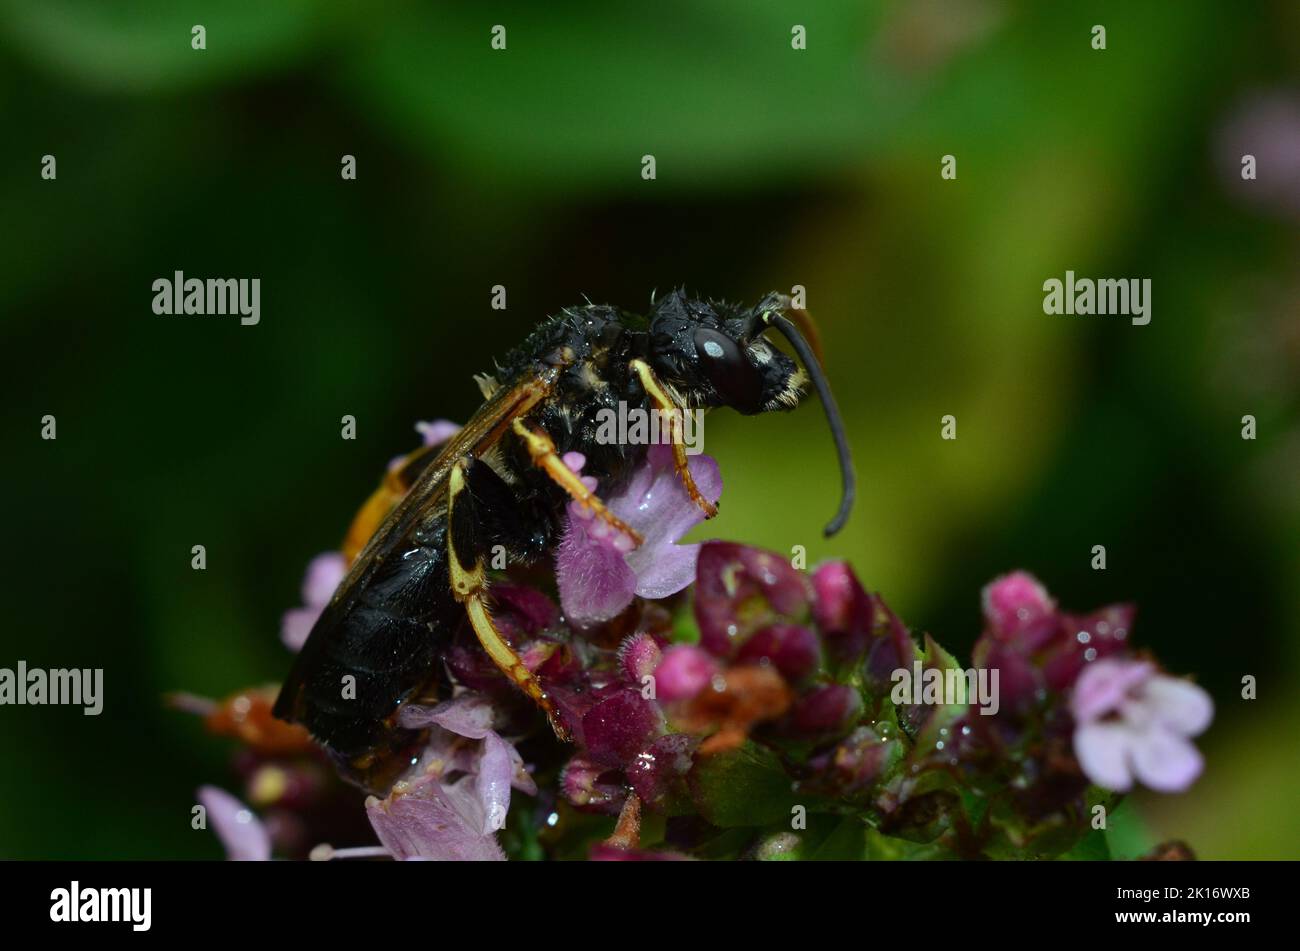 A wet wasp on blooming oregano Stock Photo